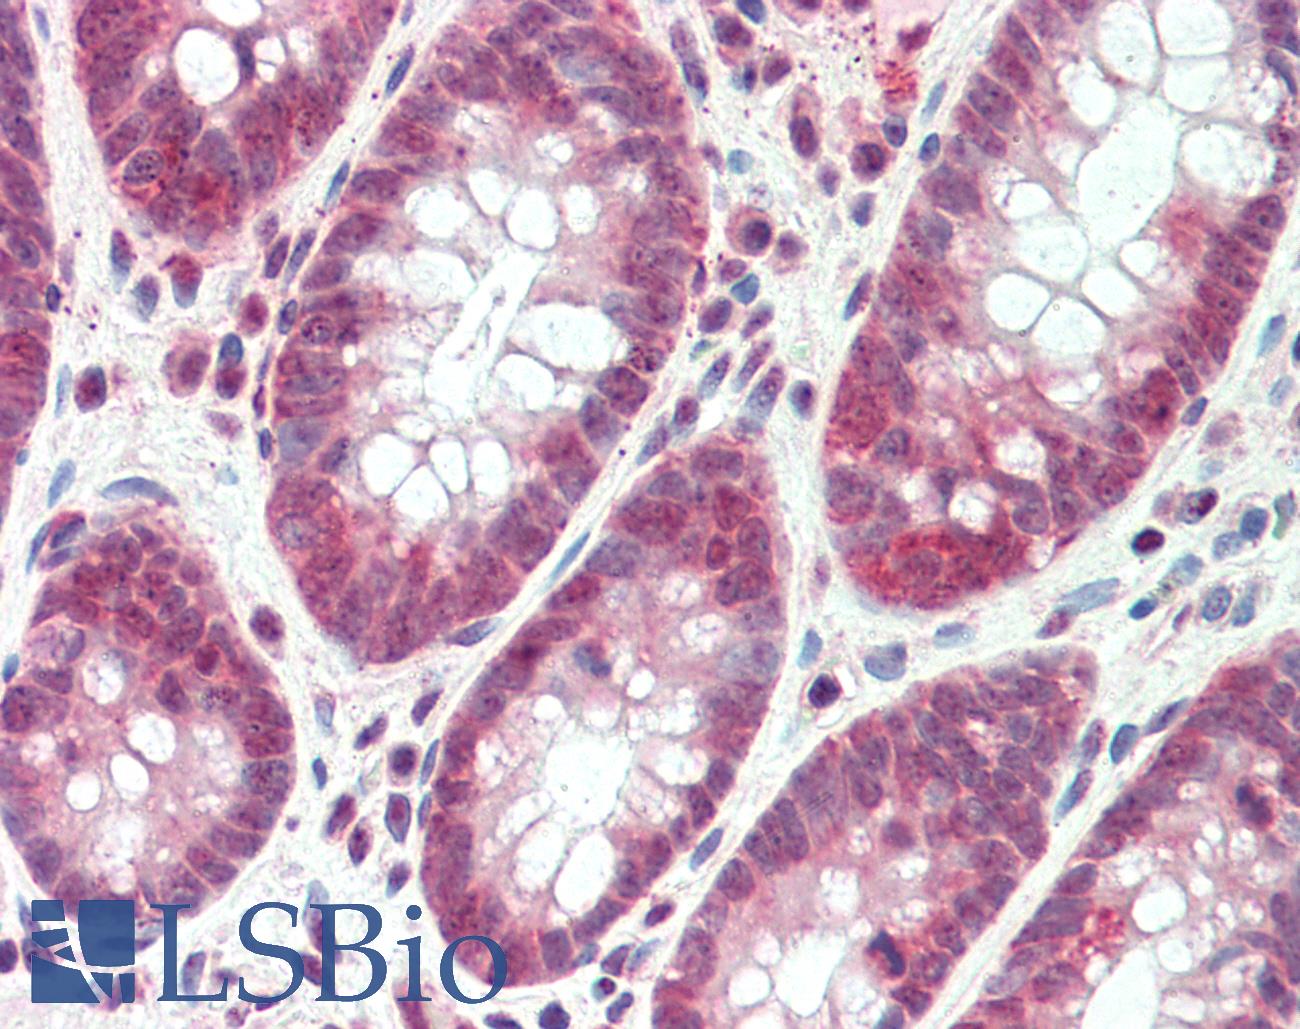 SH2D3A / NSP1 Antibody - Anti-SH2D3A / NSP1 antibody IHC staining of human colon. Immunohistochemistry of formalin-fixed, paraffin-embedded tissue after heat-induced antigen retrieval. Antibody concentration 5 ug/ml.